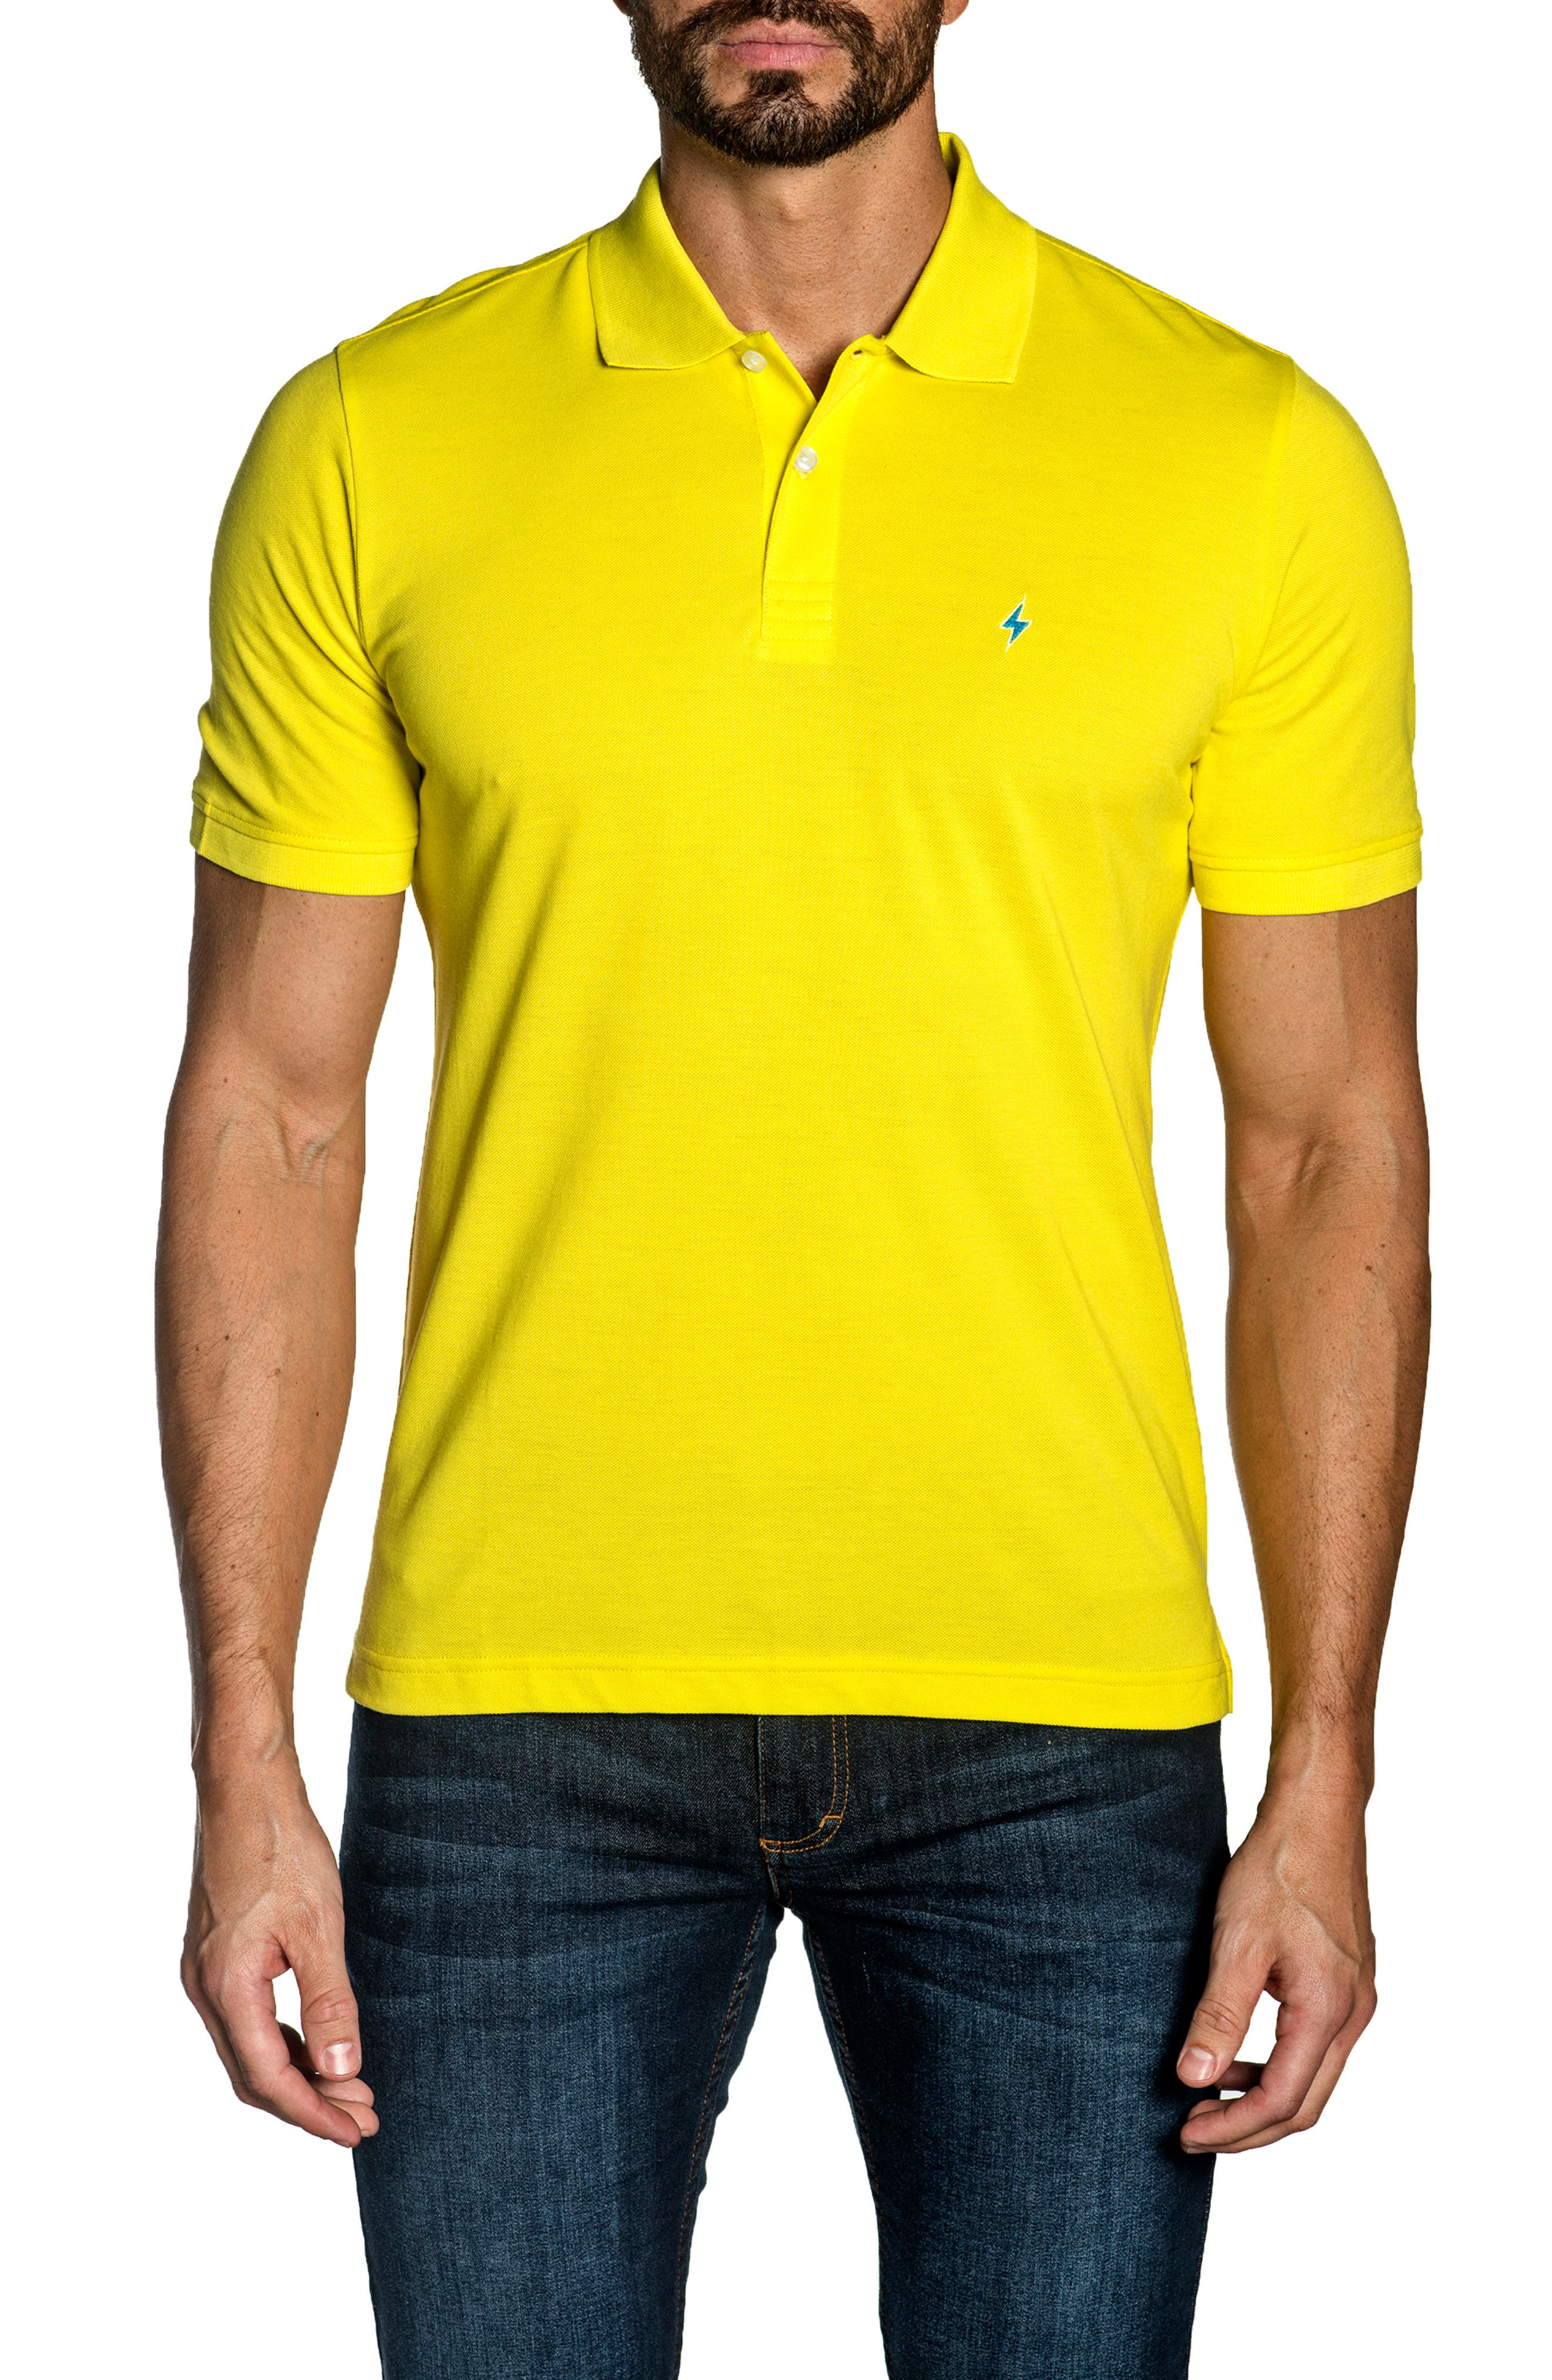 Cotton Knit Polo Jared Lang